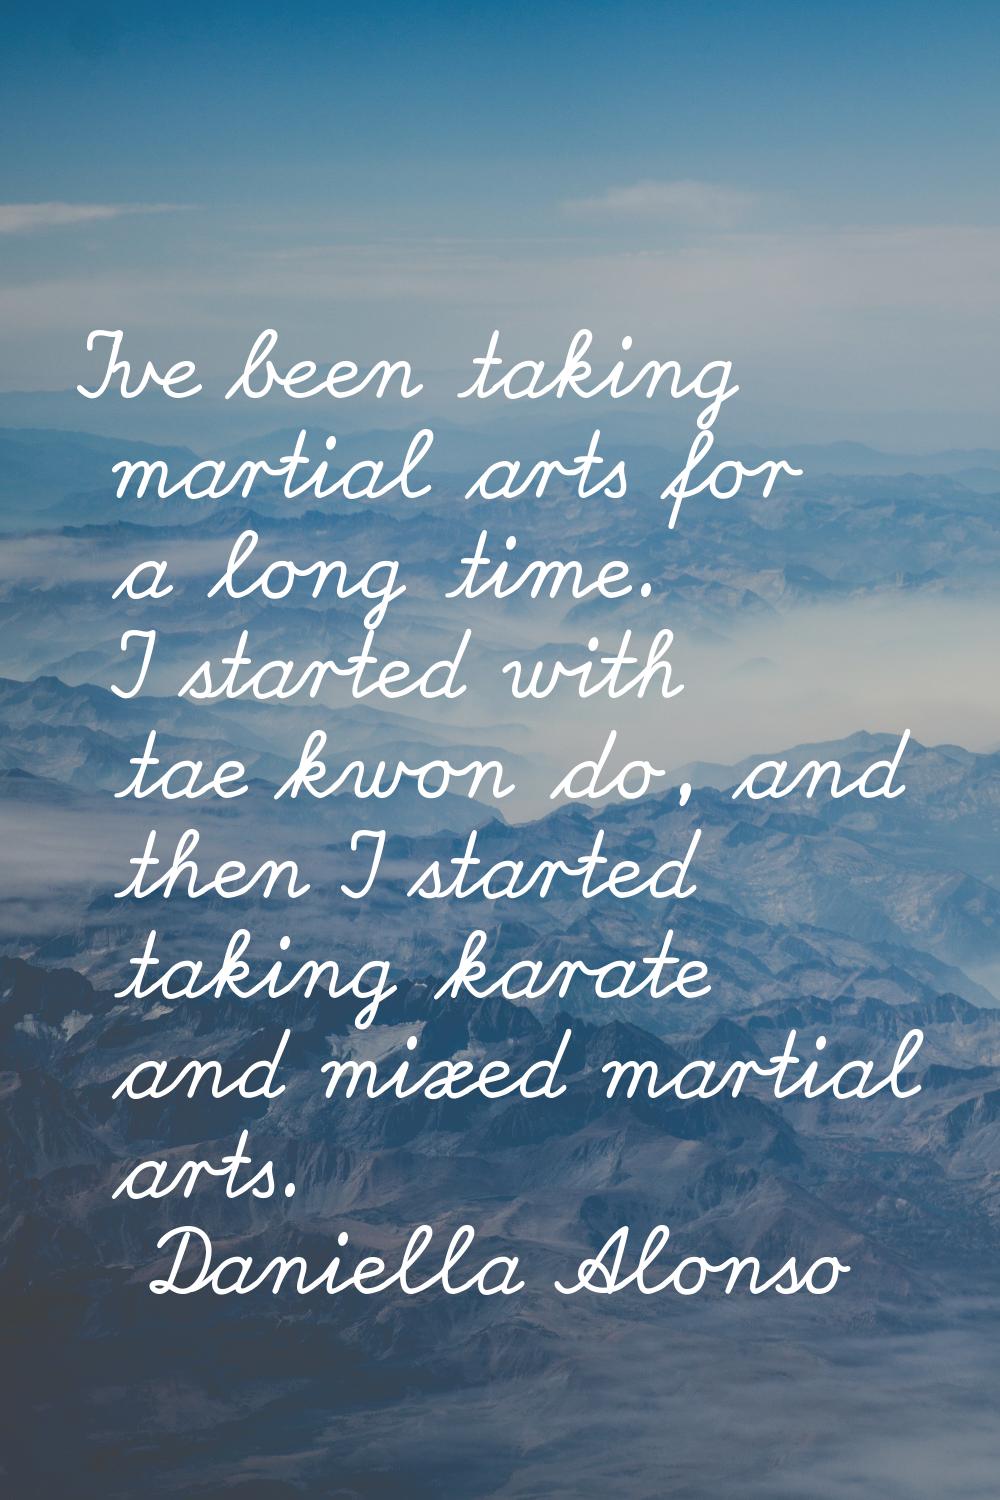 I've been taking martial arts for a long time. I started with tae kwon do, and then I started takin